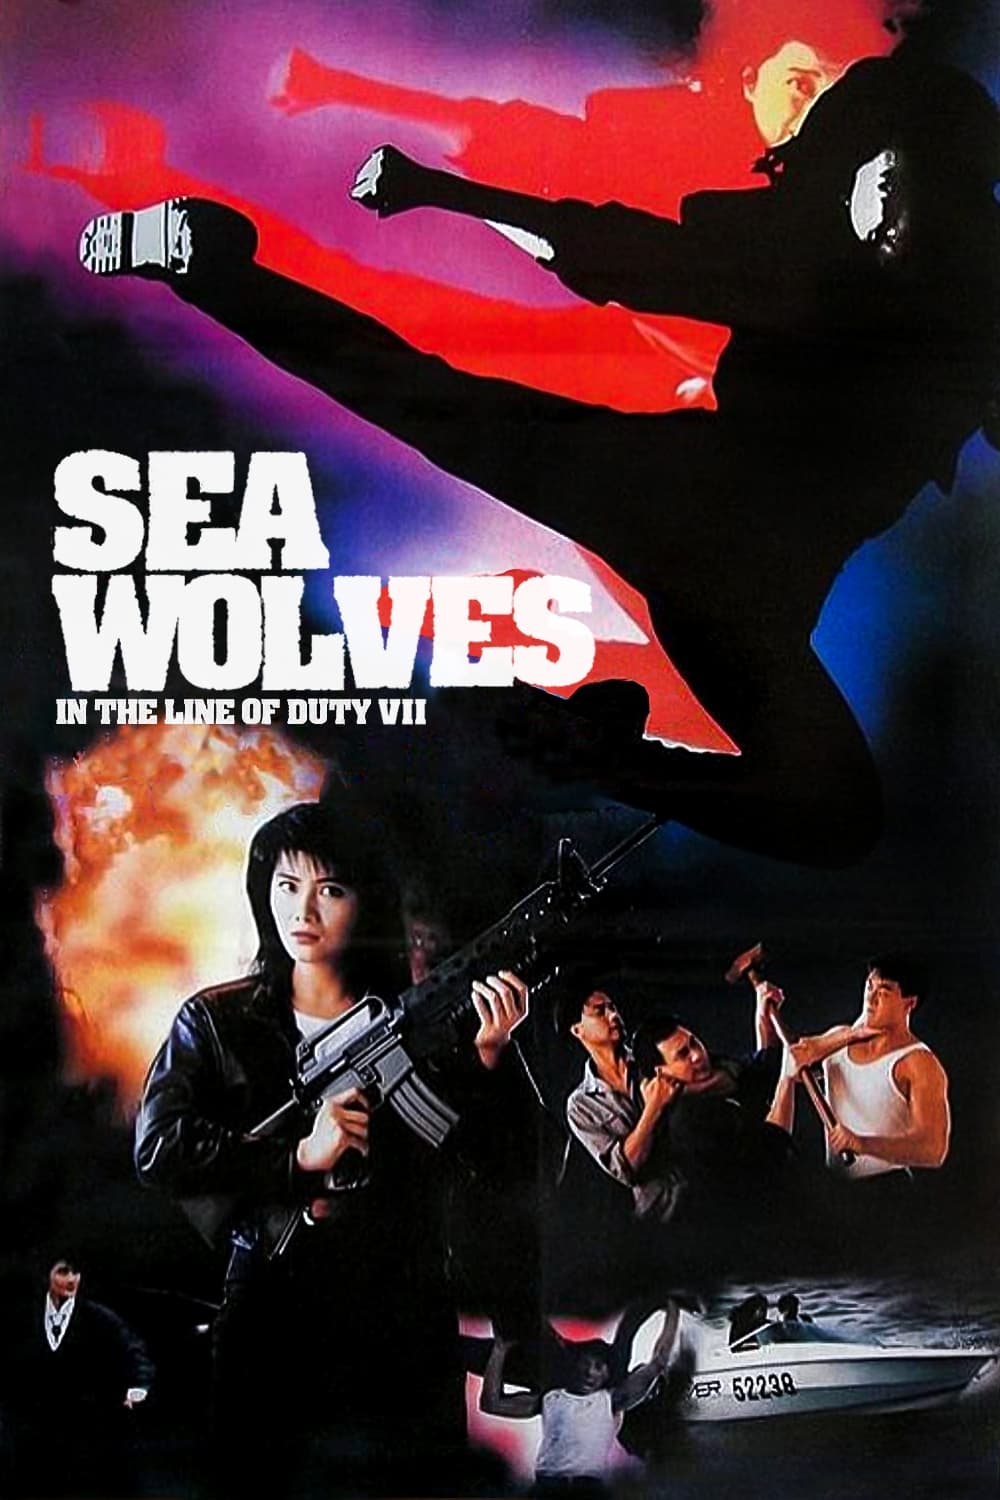 In the Line of Duty 7: Sea Wolves (1991)